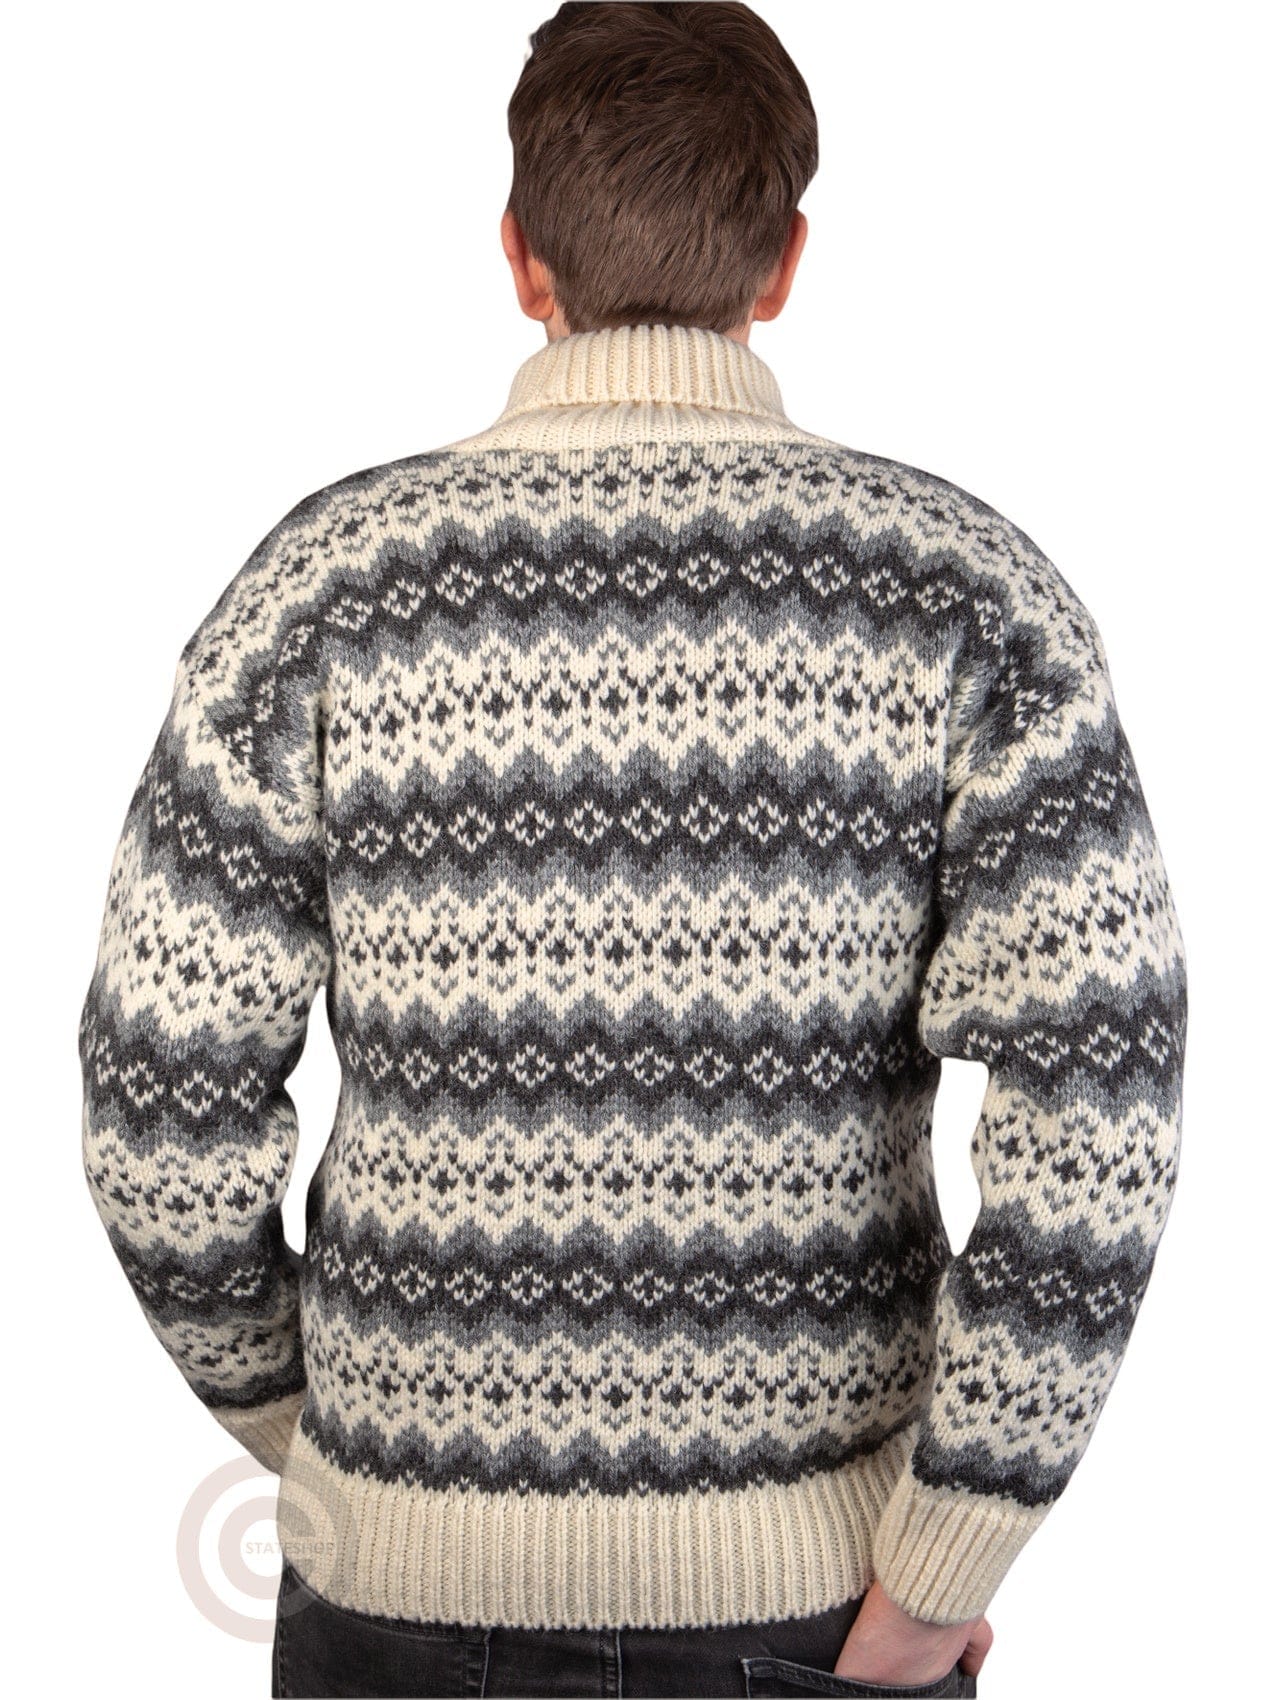 NorfindeIcelandic sweater with roll neck of 100% pure new woolStatesho -  Stateshop Fashion